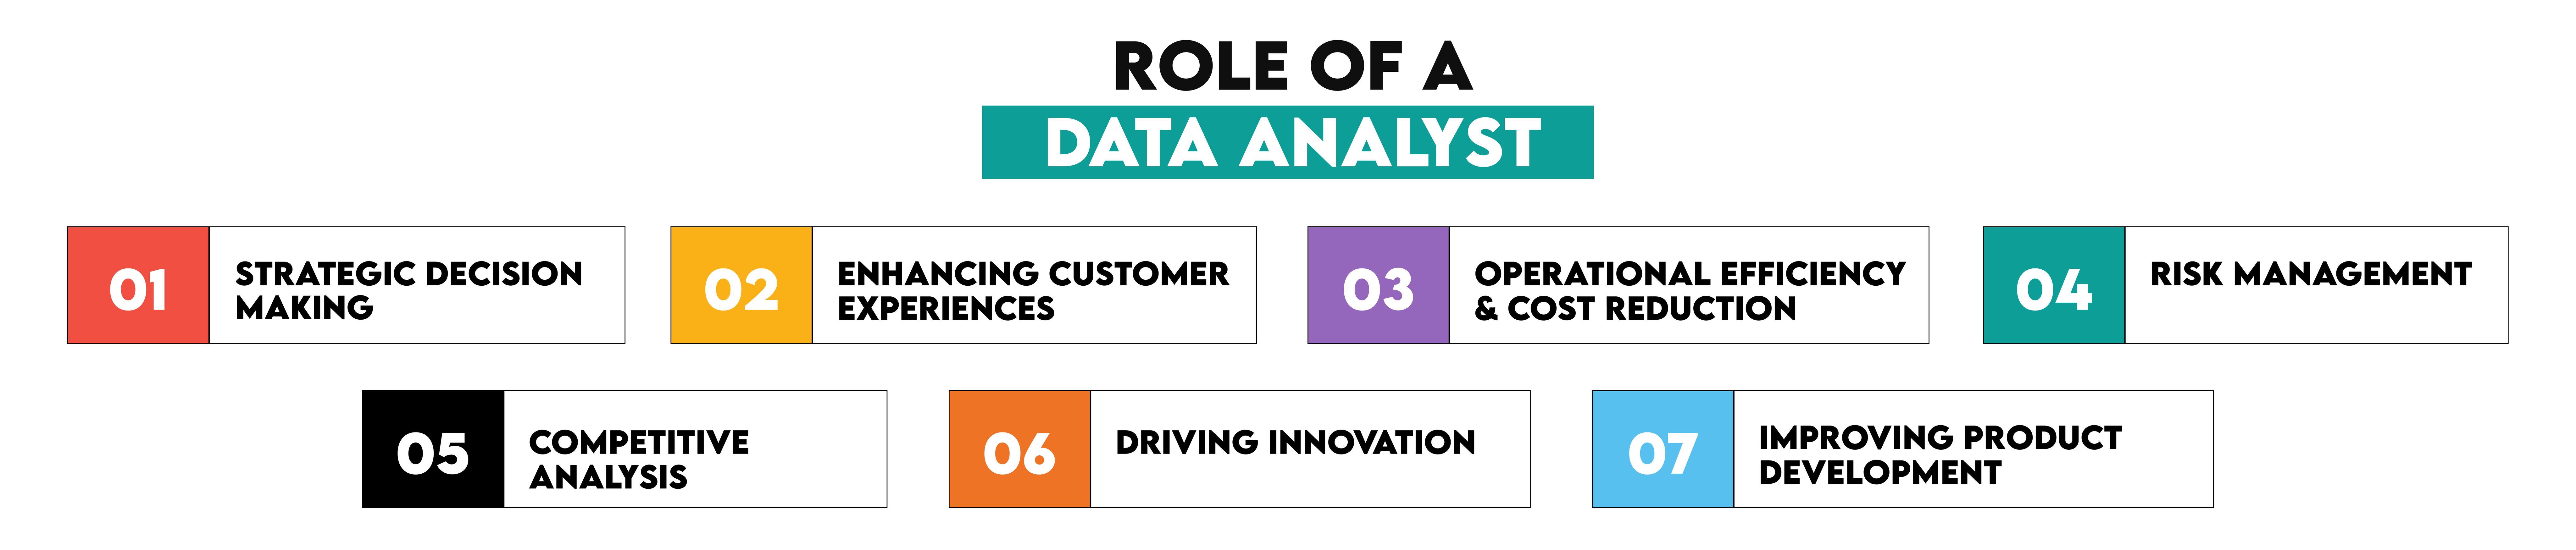 Role of a Data Analyst in Businesses and Organizations